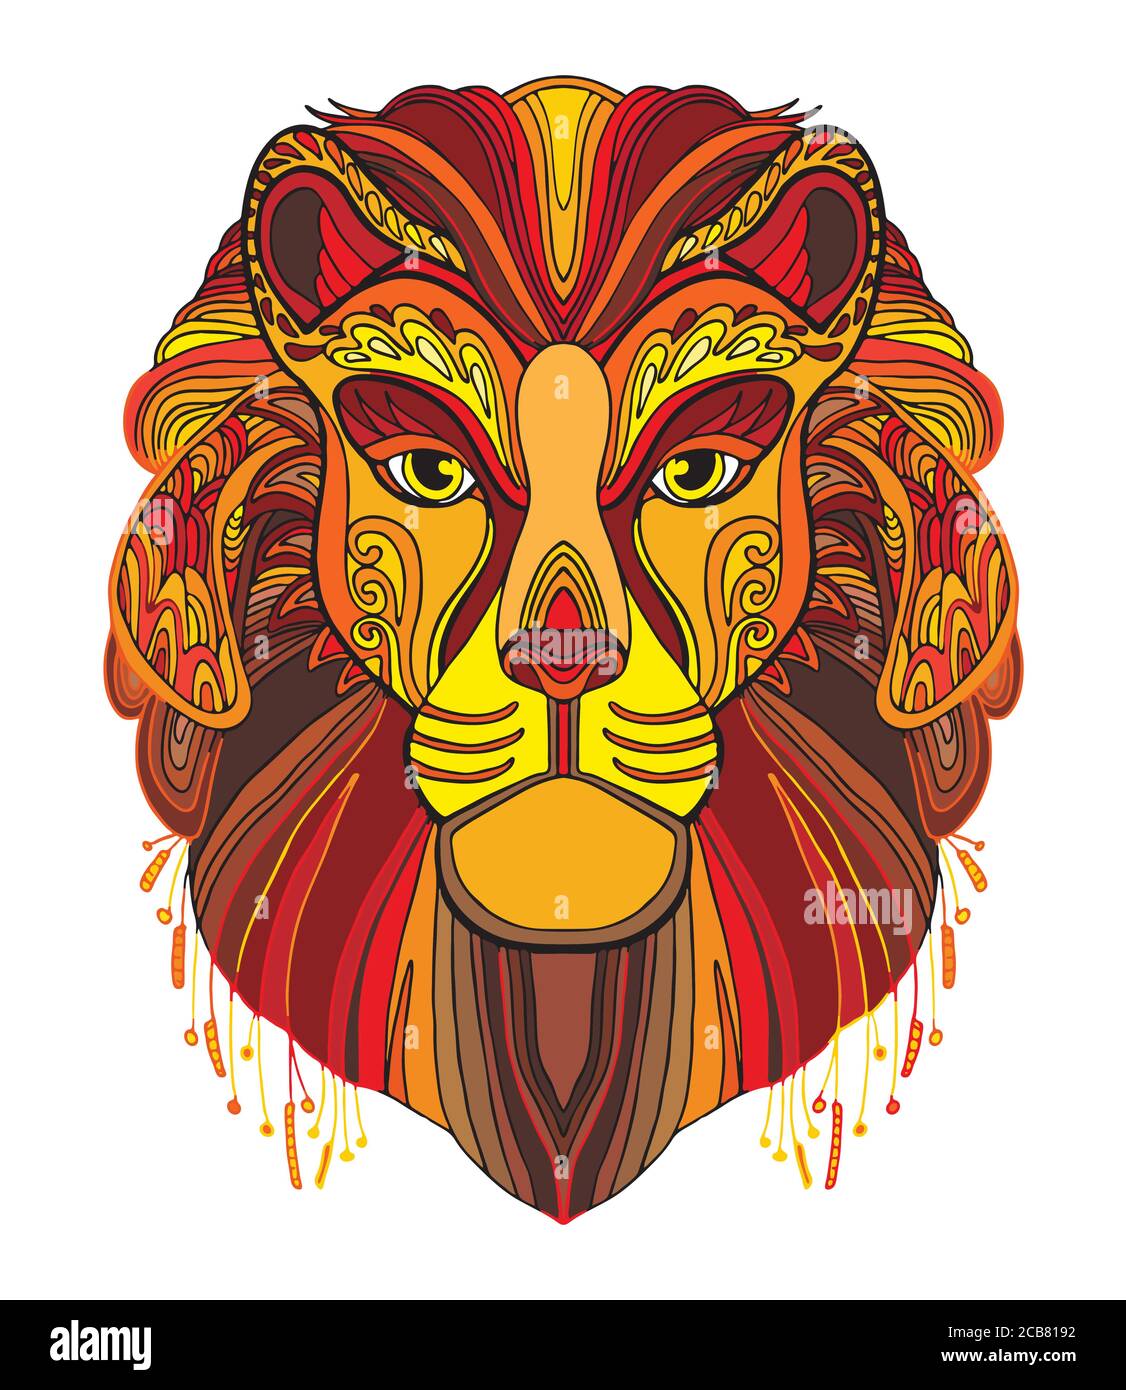 Vector colorful ornamental portrait of lion. Decorative abstract vector contour illustration isolated on white background. For adult coloring, design, Stock Vector